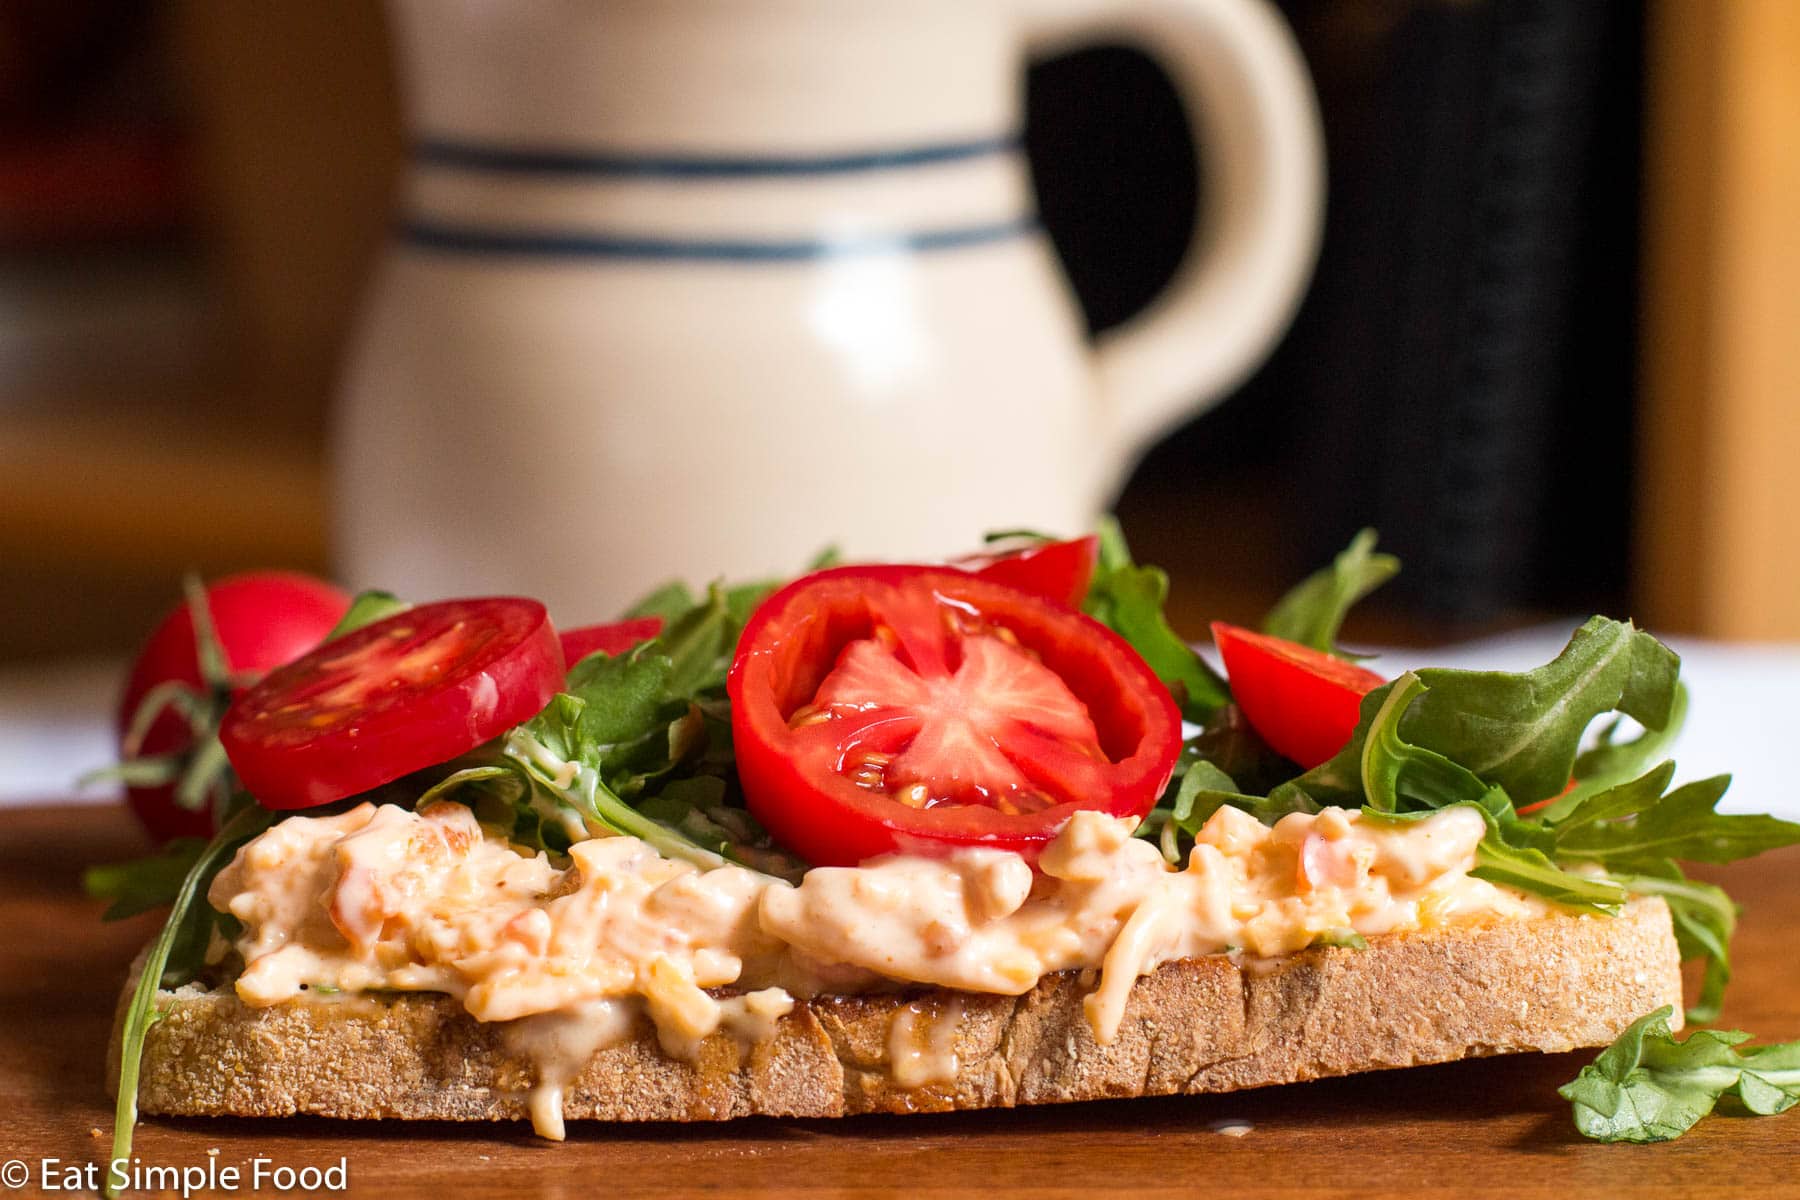 A piece of toast on a wood cutting board topped with pimento cheese, arugula, and sliced small tomatoes. 1 tomatoes in backdrop. side view.